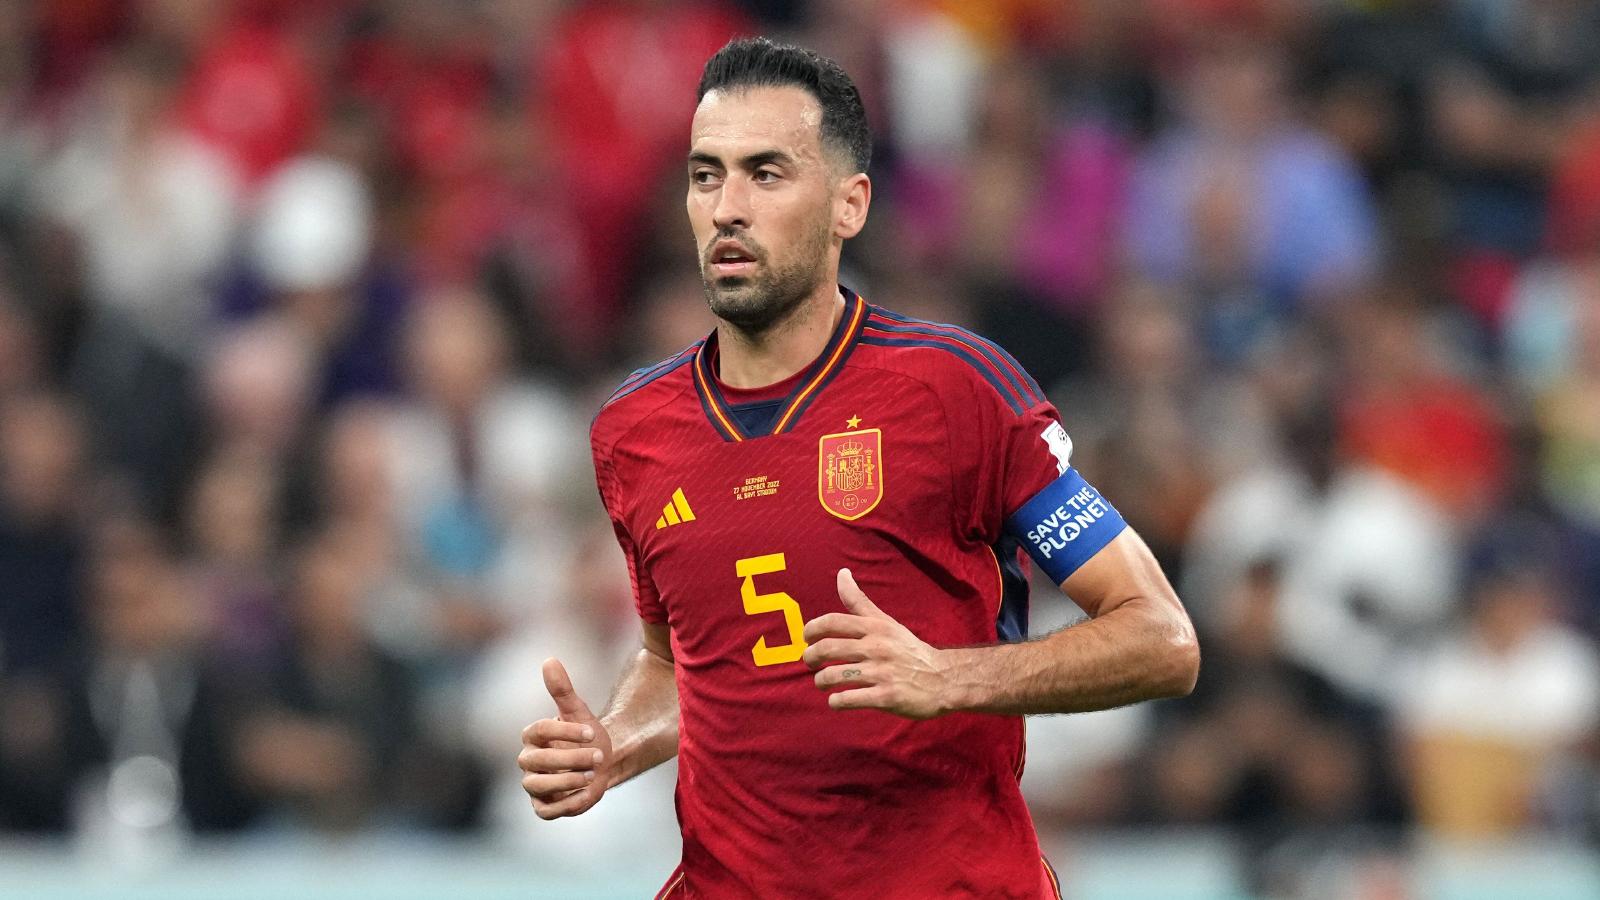 Sergio Busquets announces retirement from Spain duty after historic career